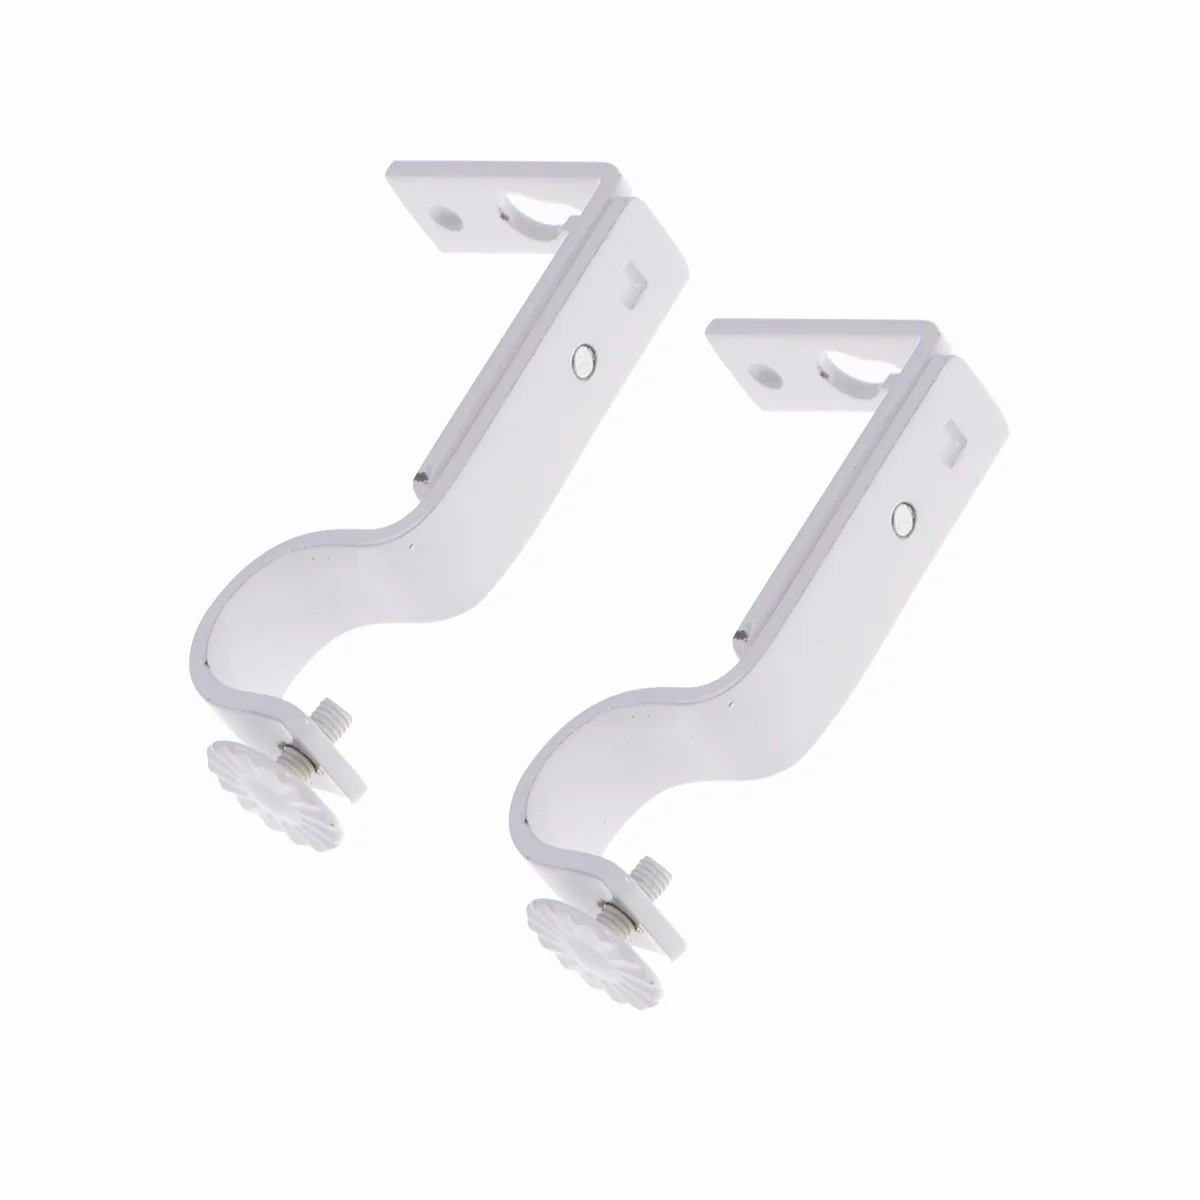 

Curtain Rod Bracket Brackets Holder Hooks No Drapery Holders Wall Hangers Rods Extender Pole Mounting Support Drilling Drill